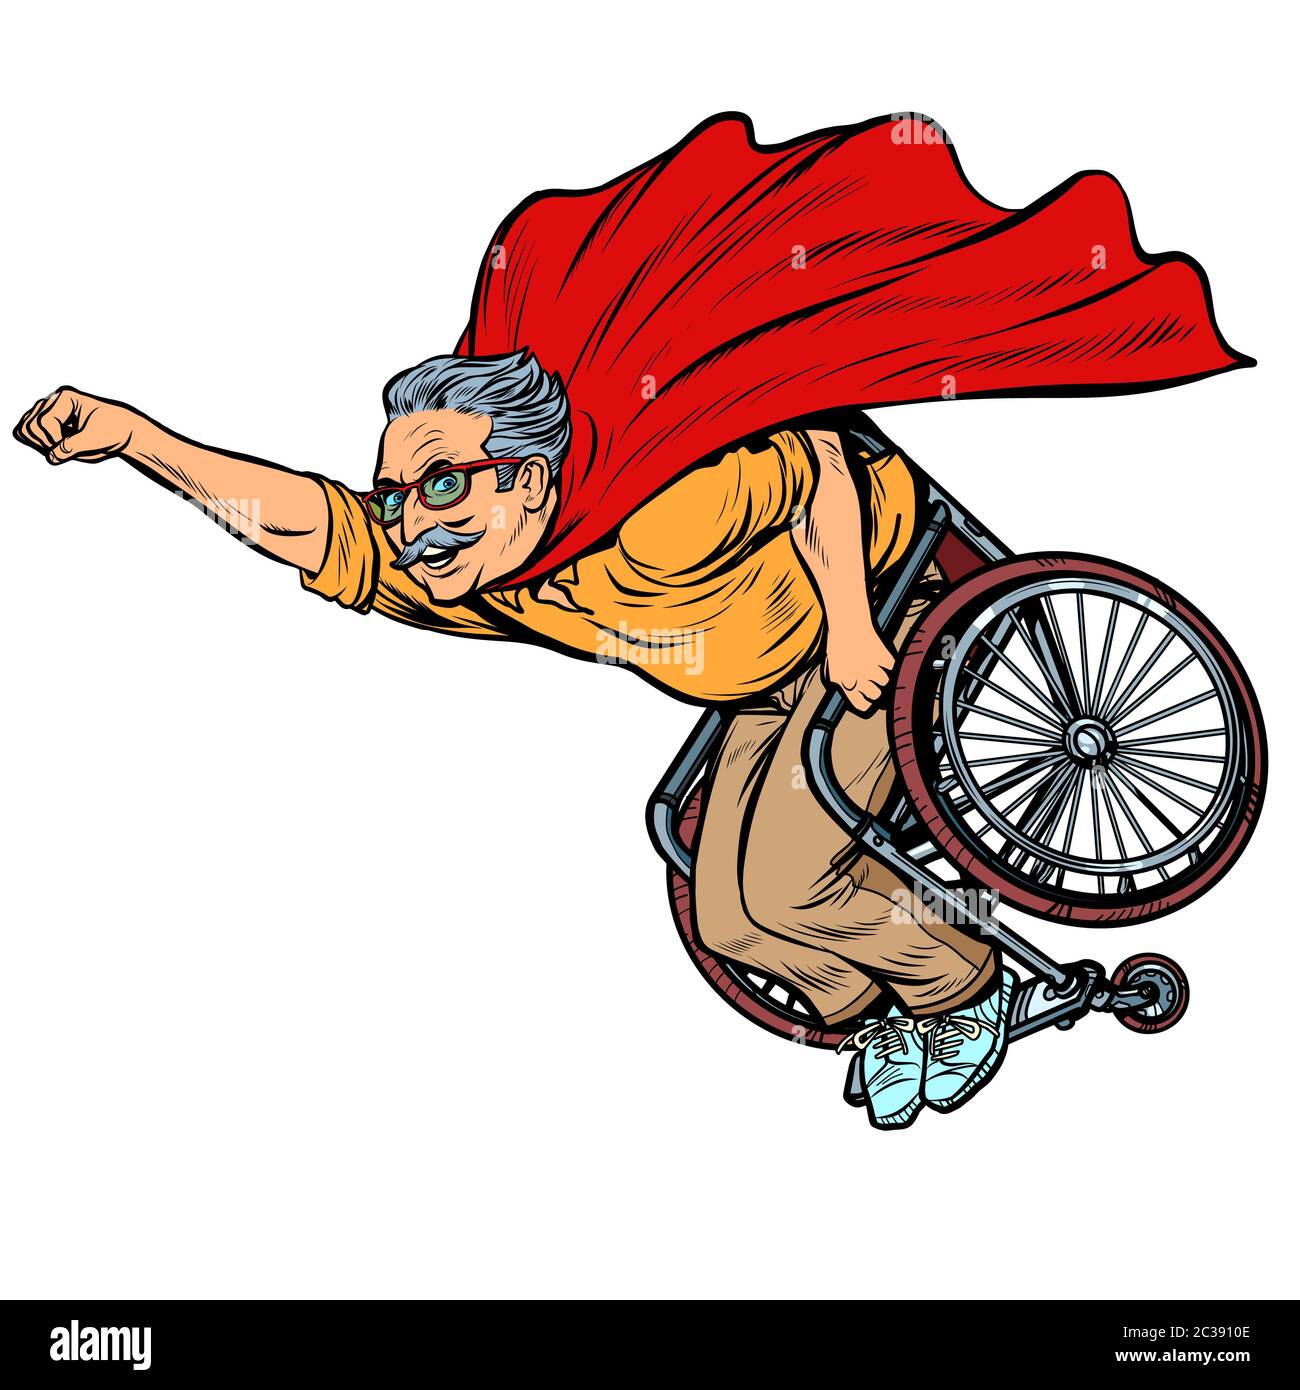 man retired superhero disabled in a wheelchair. Health and longevity of older people. Pop art retro vector illustration drawing vintage kitsch Stock Photo